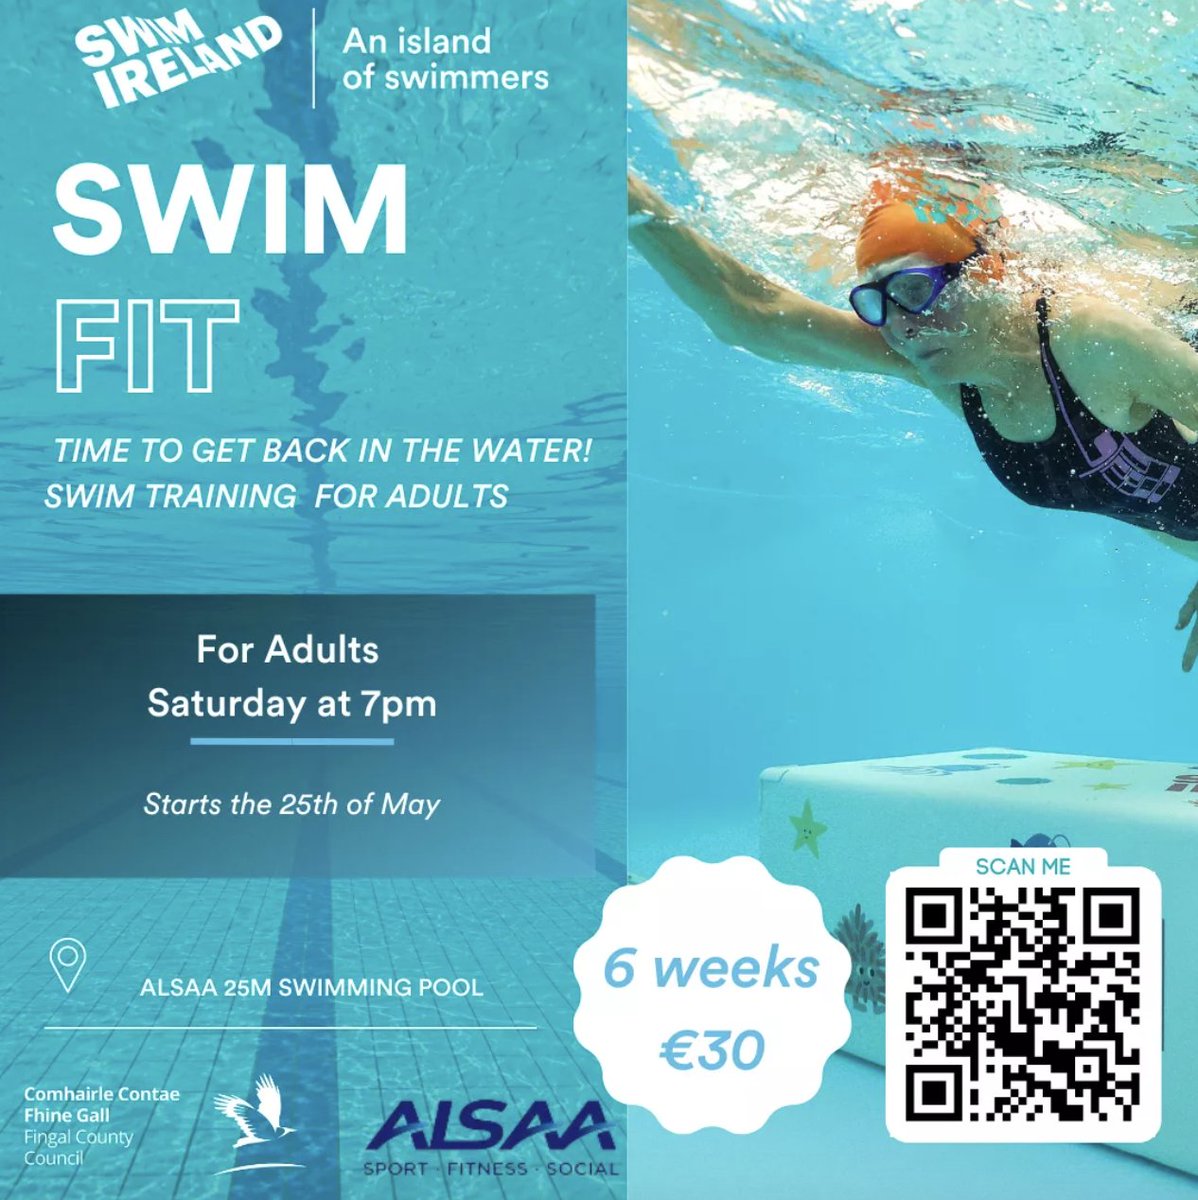 Dive into a healthier you with our 6-week Adult SwimFit Programme at the ALSAA 25m Swimming Pool starting on May 25! 🏊‍♀️ 🕐 7pm - 8pm on Saturdays 📍 ALSAA 25m Swimming Pool 🗓️ 6 weeks, May 25 to June 29 Sign up: eventmaster.ie/event/6ZxLCEpT… @swimireland @sportireland @fingalcoco